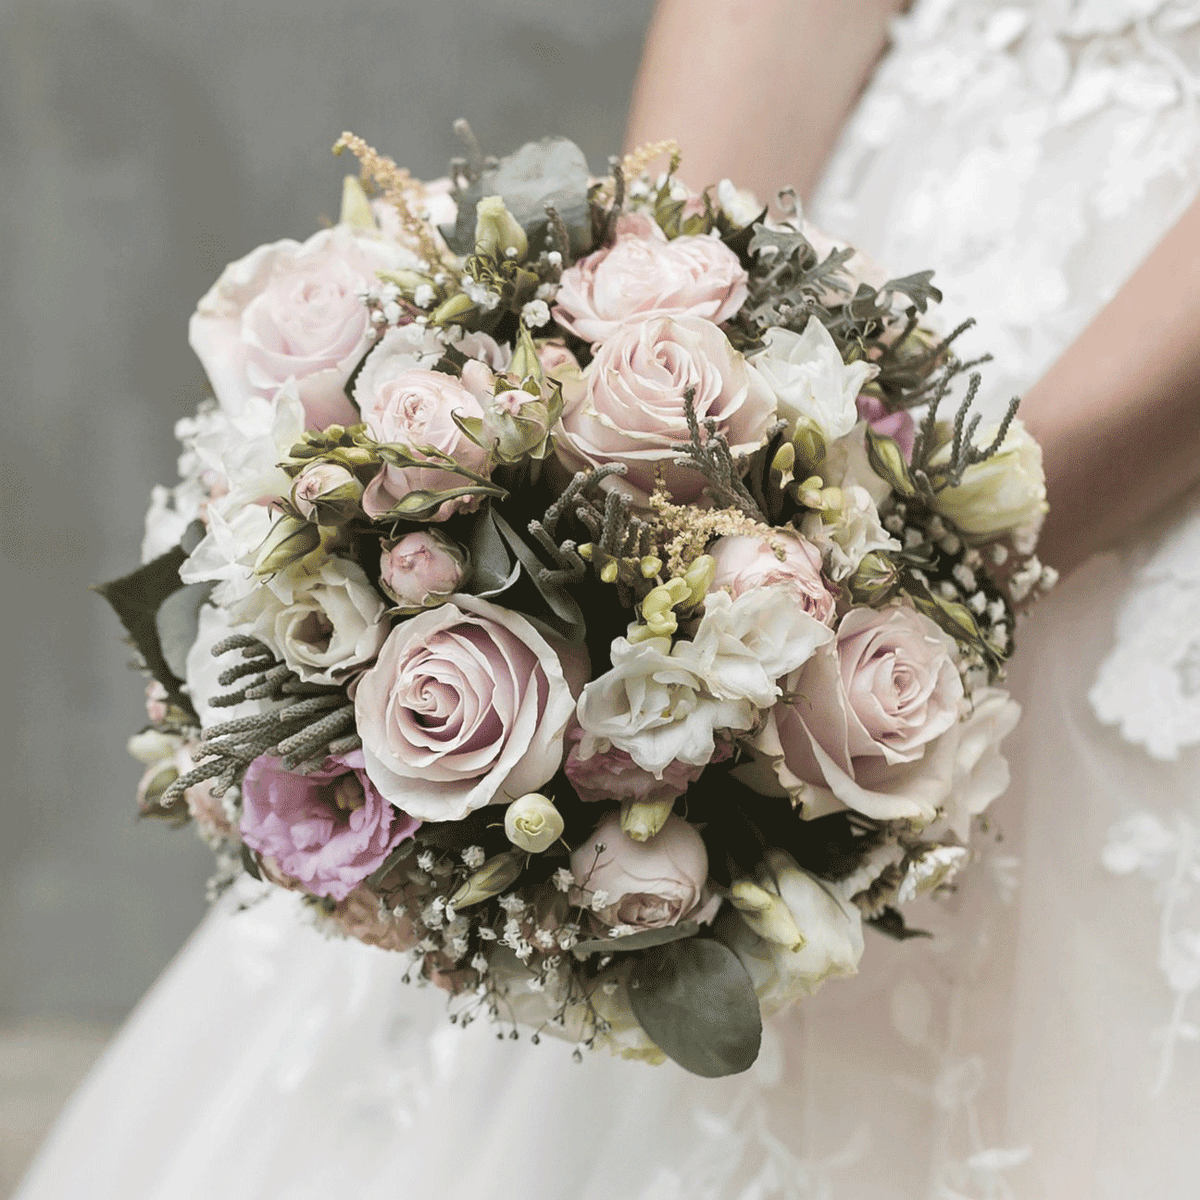 Bride holding stunning wedding flowers with roses by Inspired Flowers